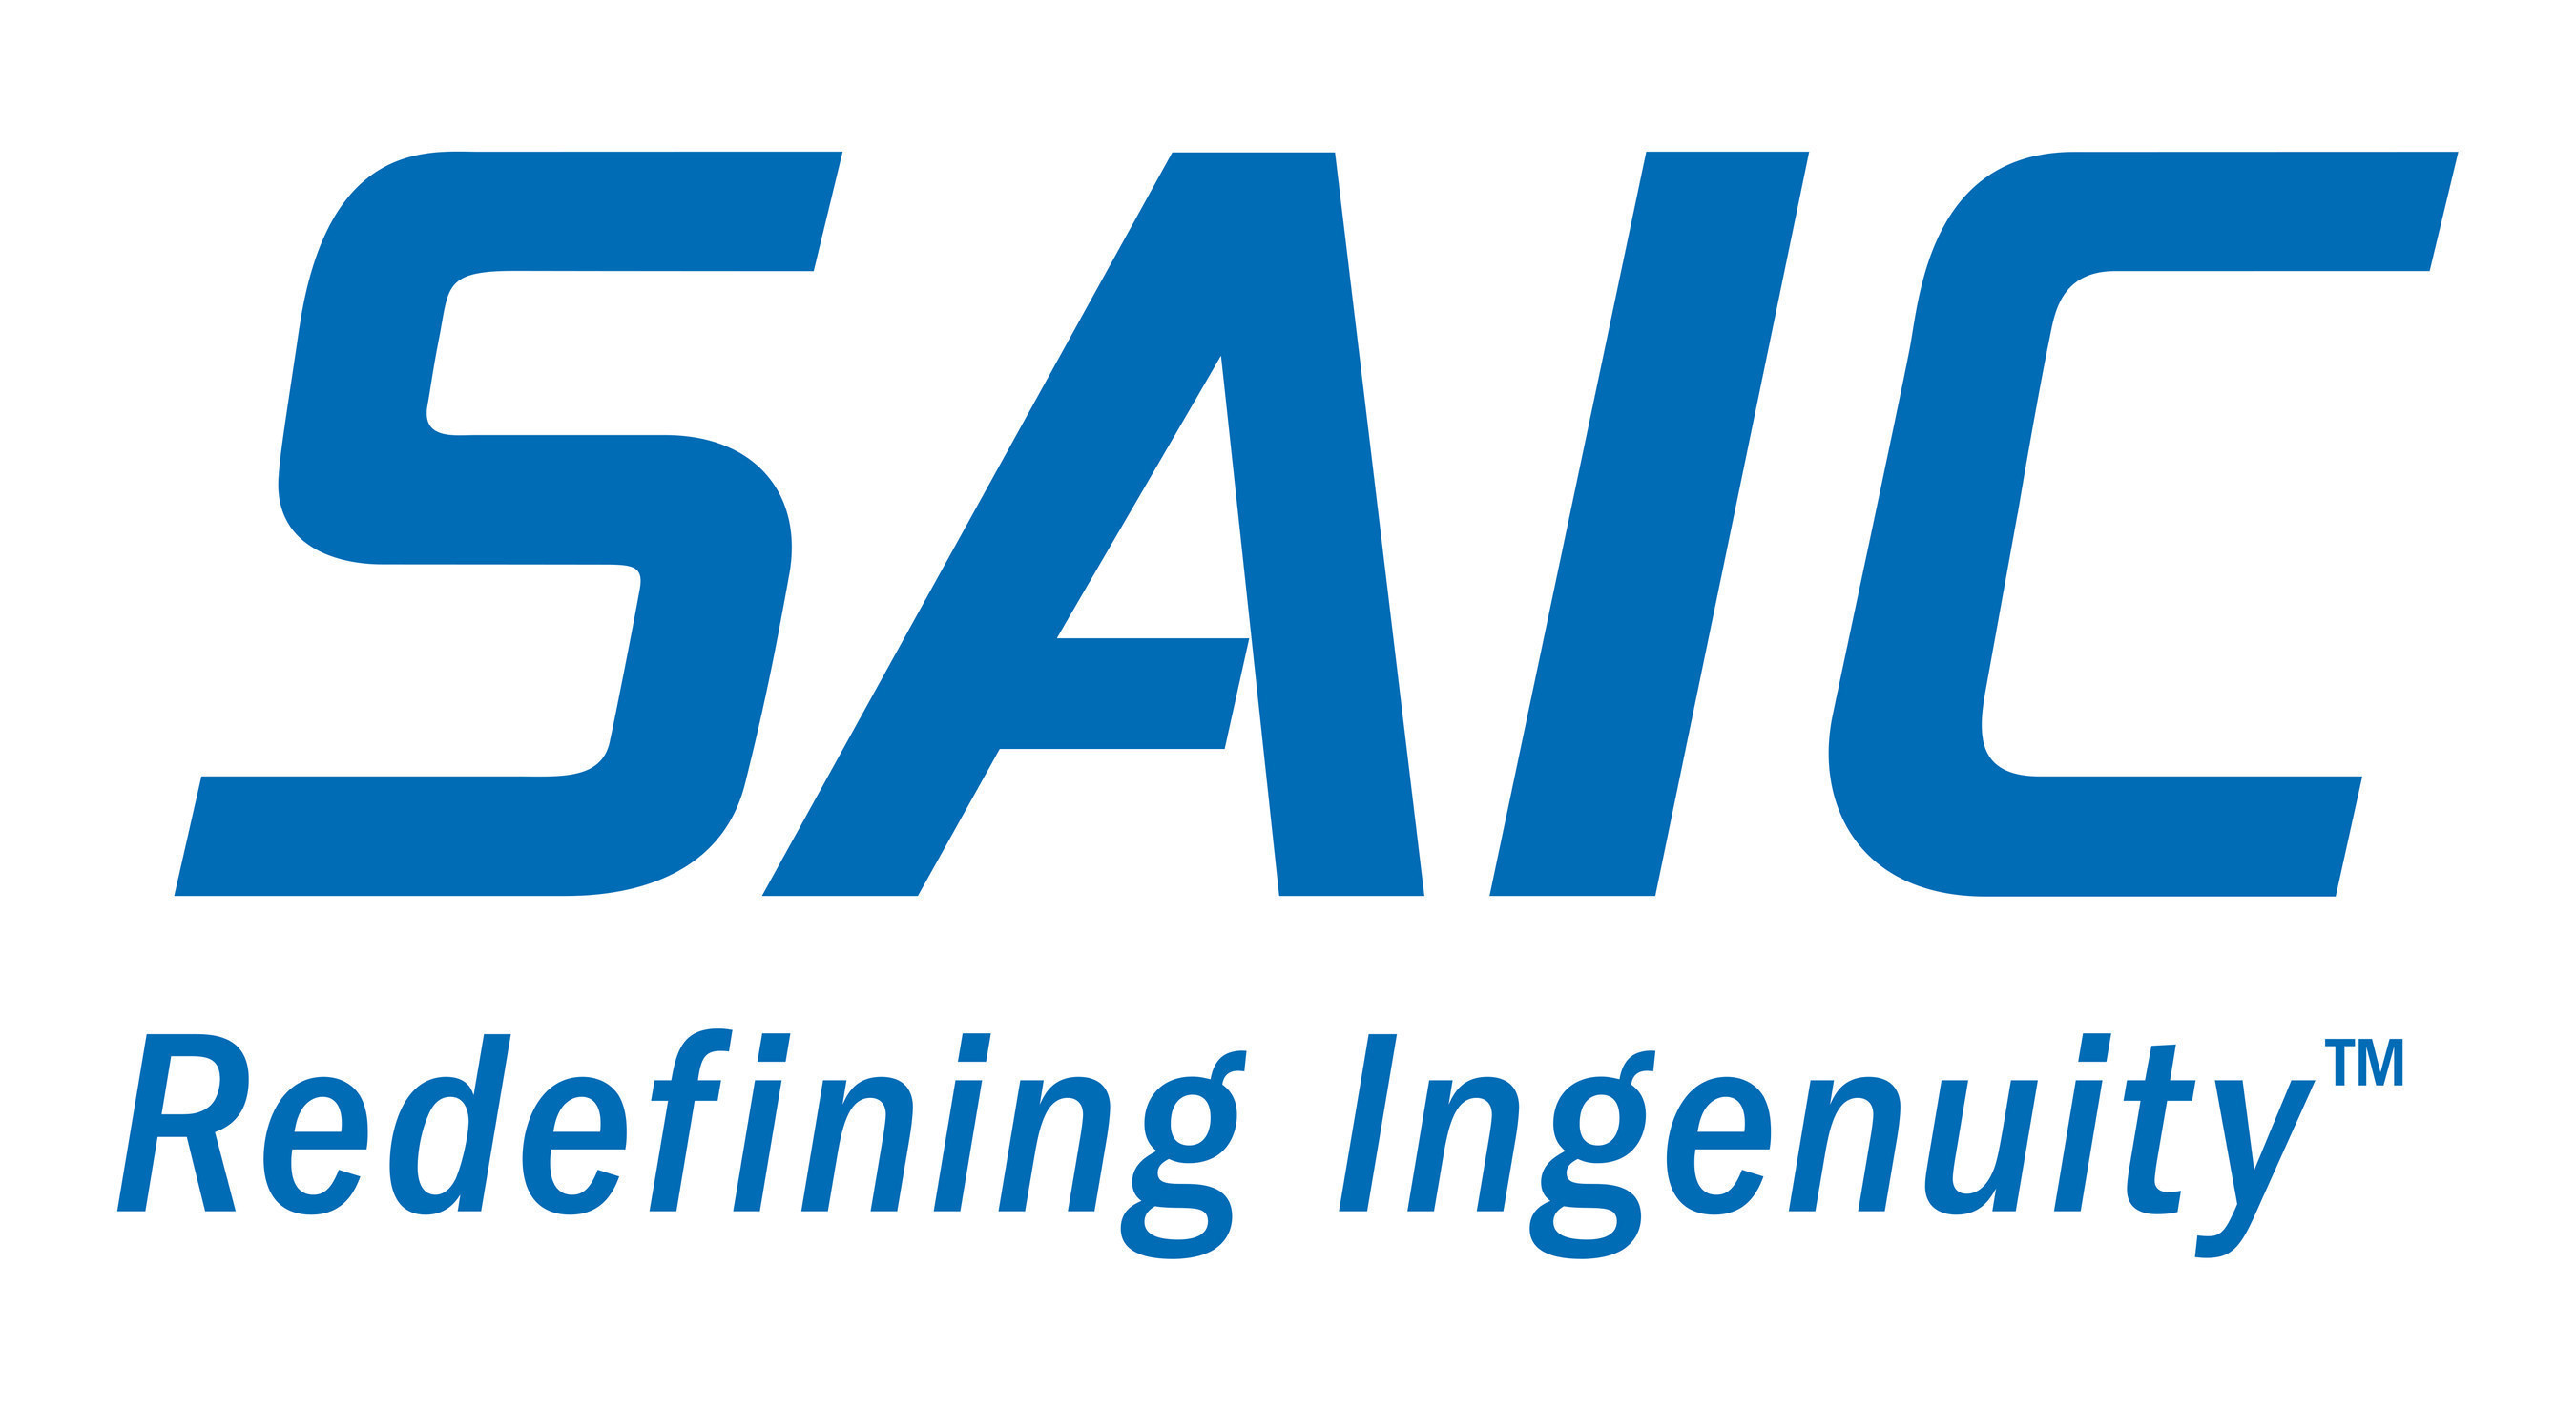 At SAIC, we empower our people to apply their integrity, mission understanding, and creativity to change the way innovation happens.